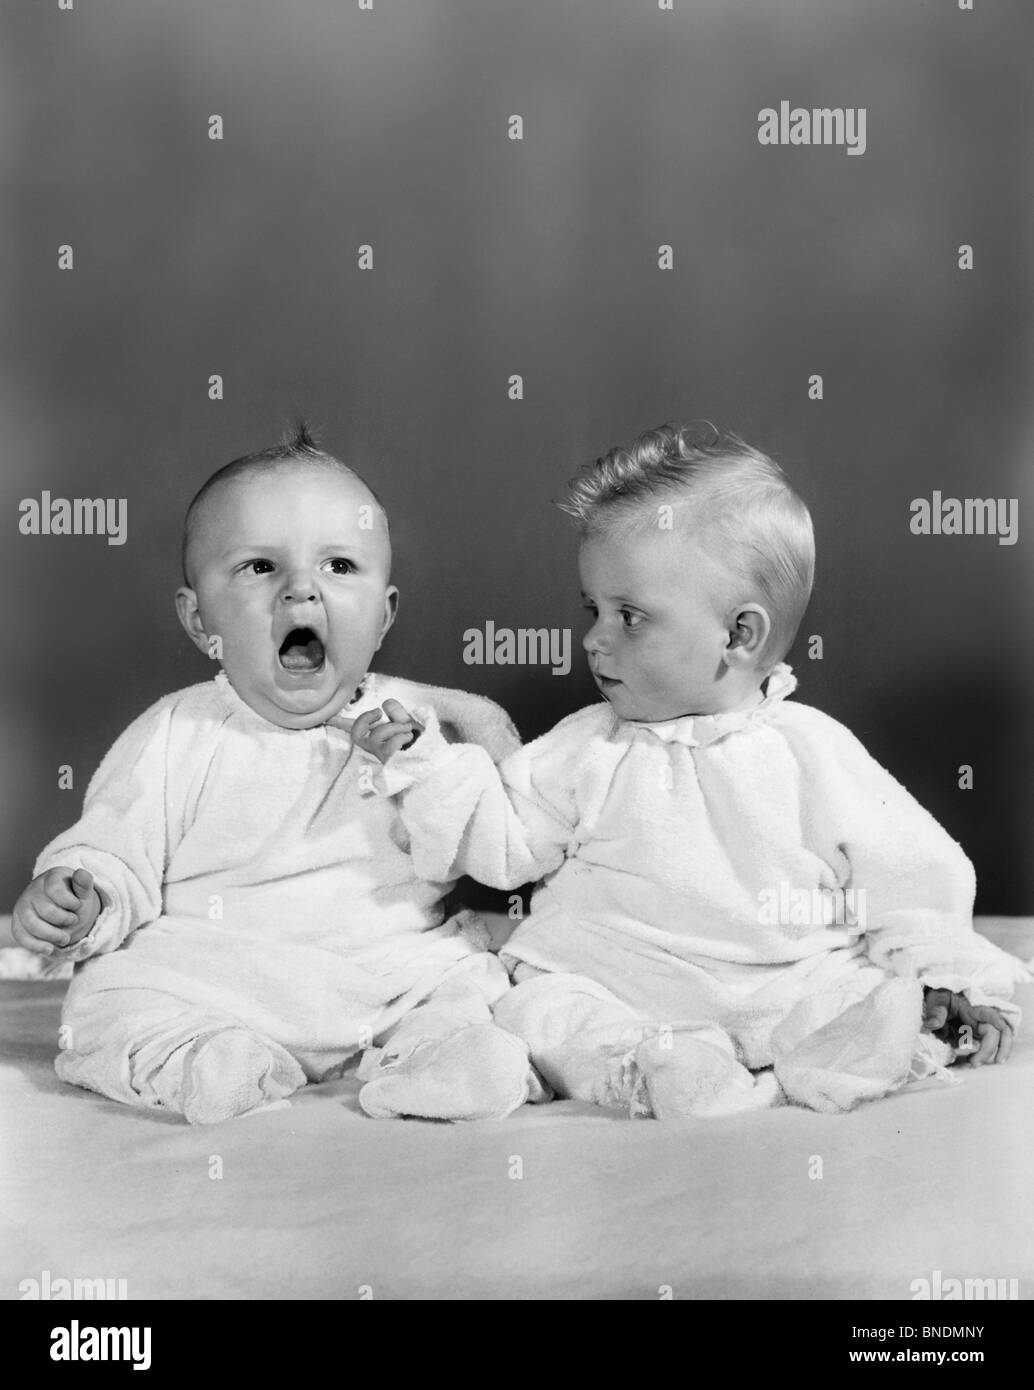 Two babies sitting together Stock Photo